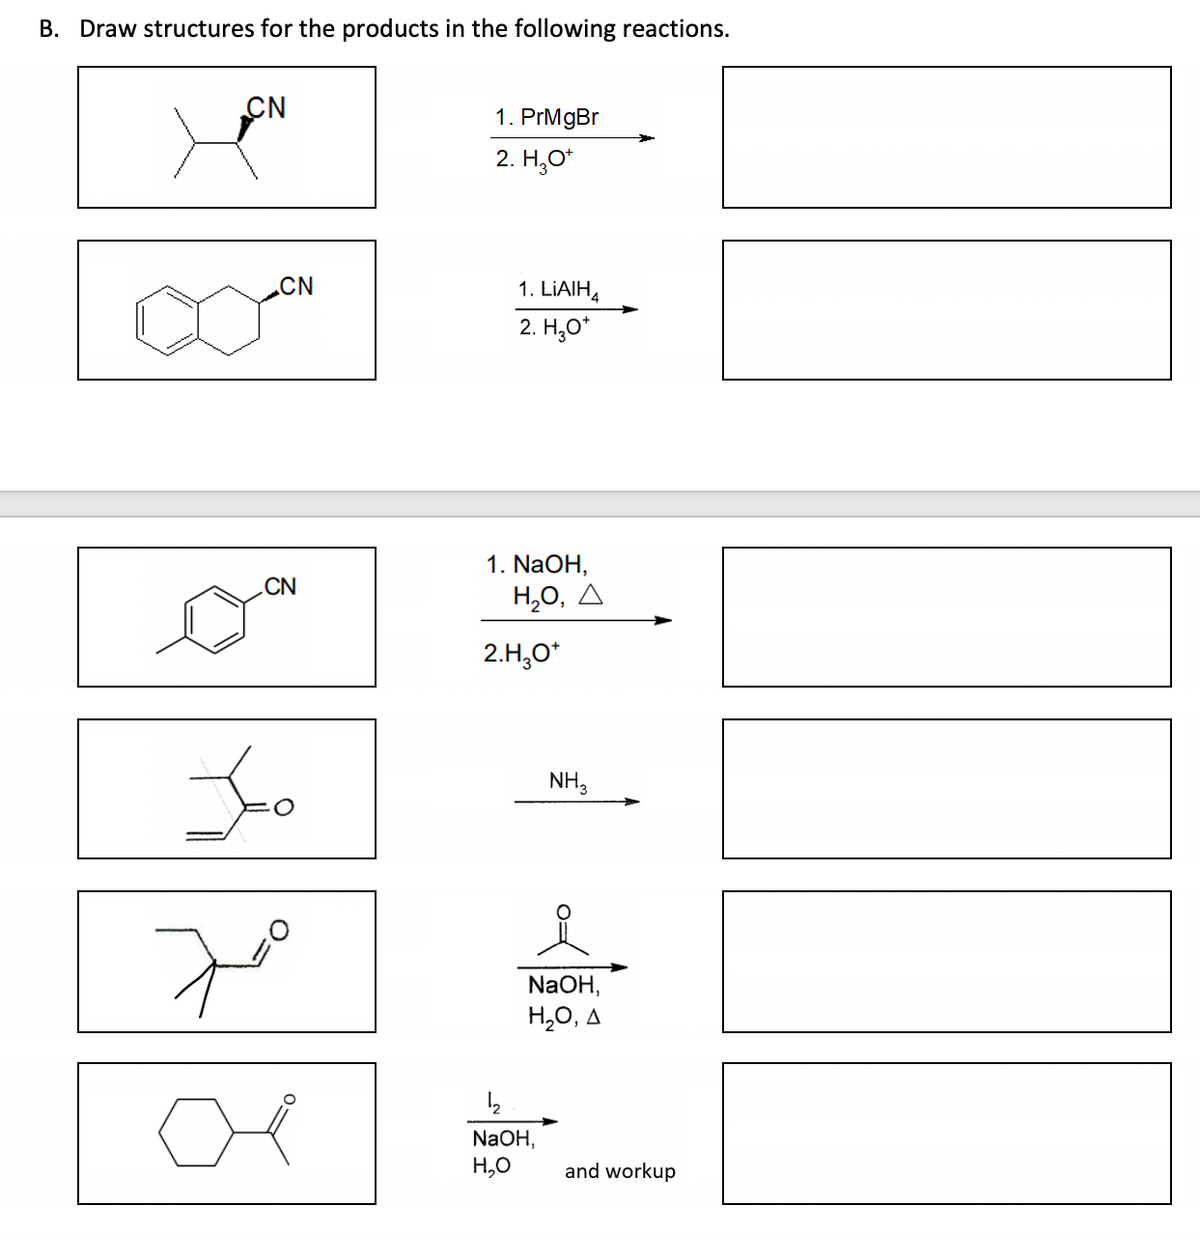 B. Draw structures for the products in the following reactions.
CN
XEN
CN
CN
Jo
7⁰
1. PrMgBr
2. H₂O*
1. LiAlH4
2. H₂O*
1. NaOH,
Η,Ο, Δ
2.H₂O*
NH3
NaOH,
H₂O, A
1₂
NaOH,
H₂O
and workup